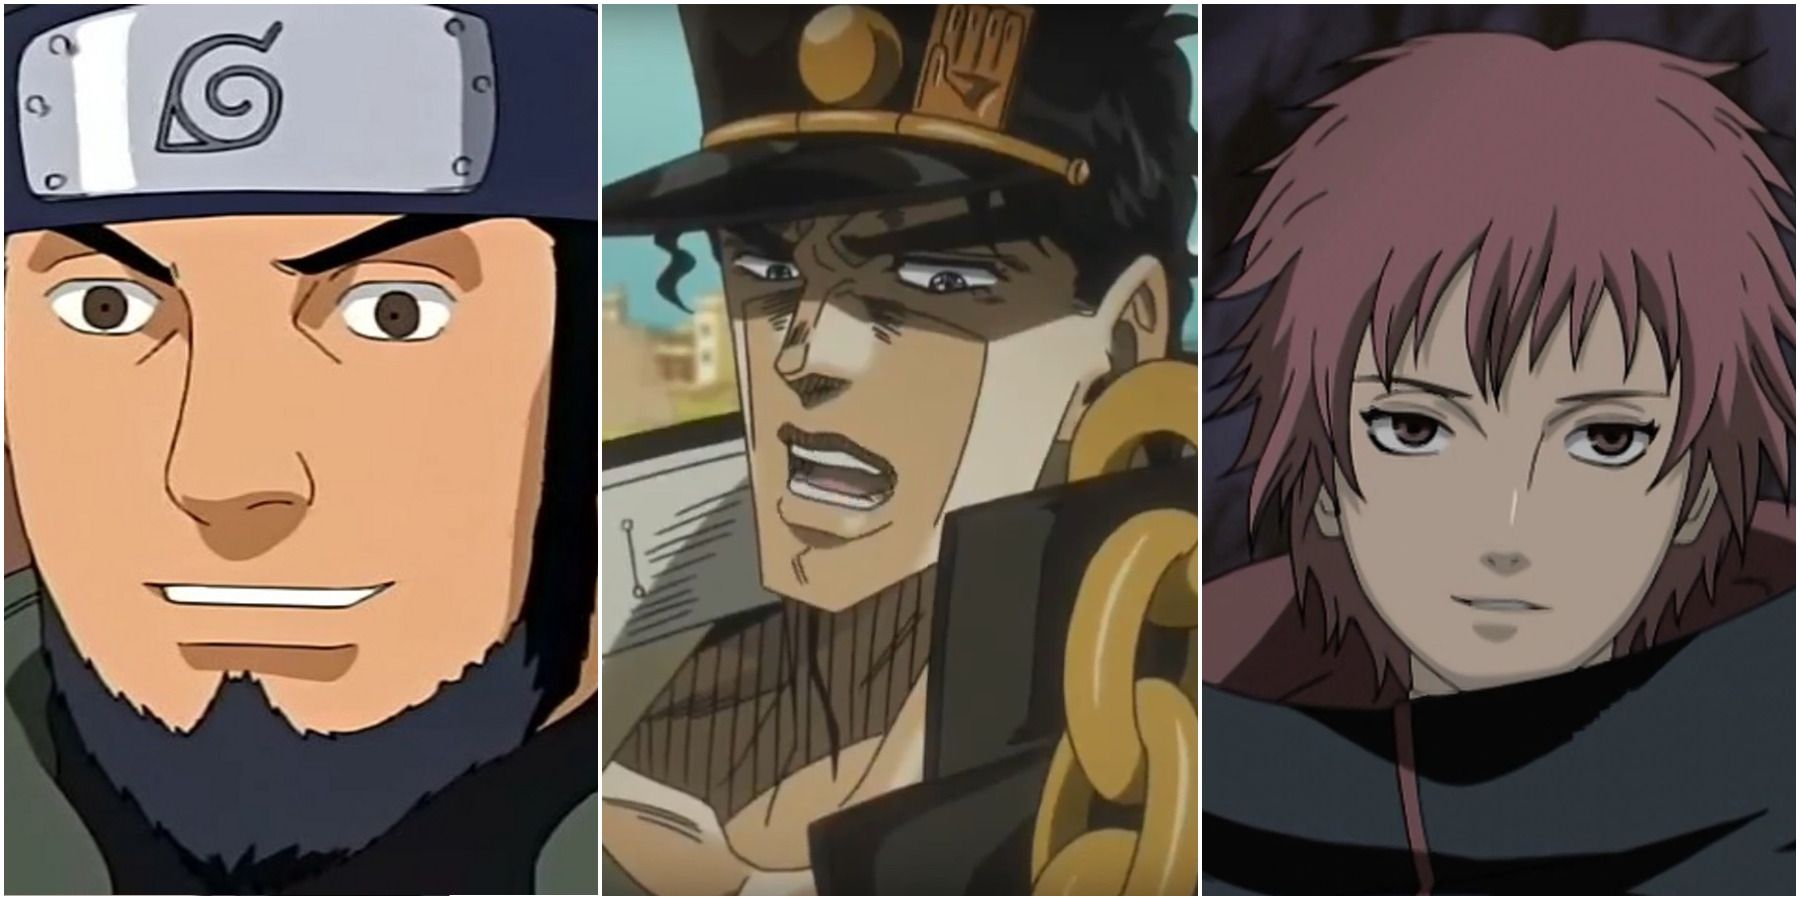 Since Naruto is Boundless, can he now Beat Jotaro? - Quora